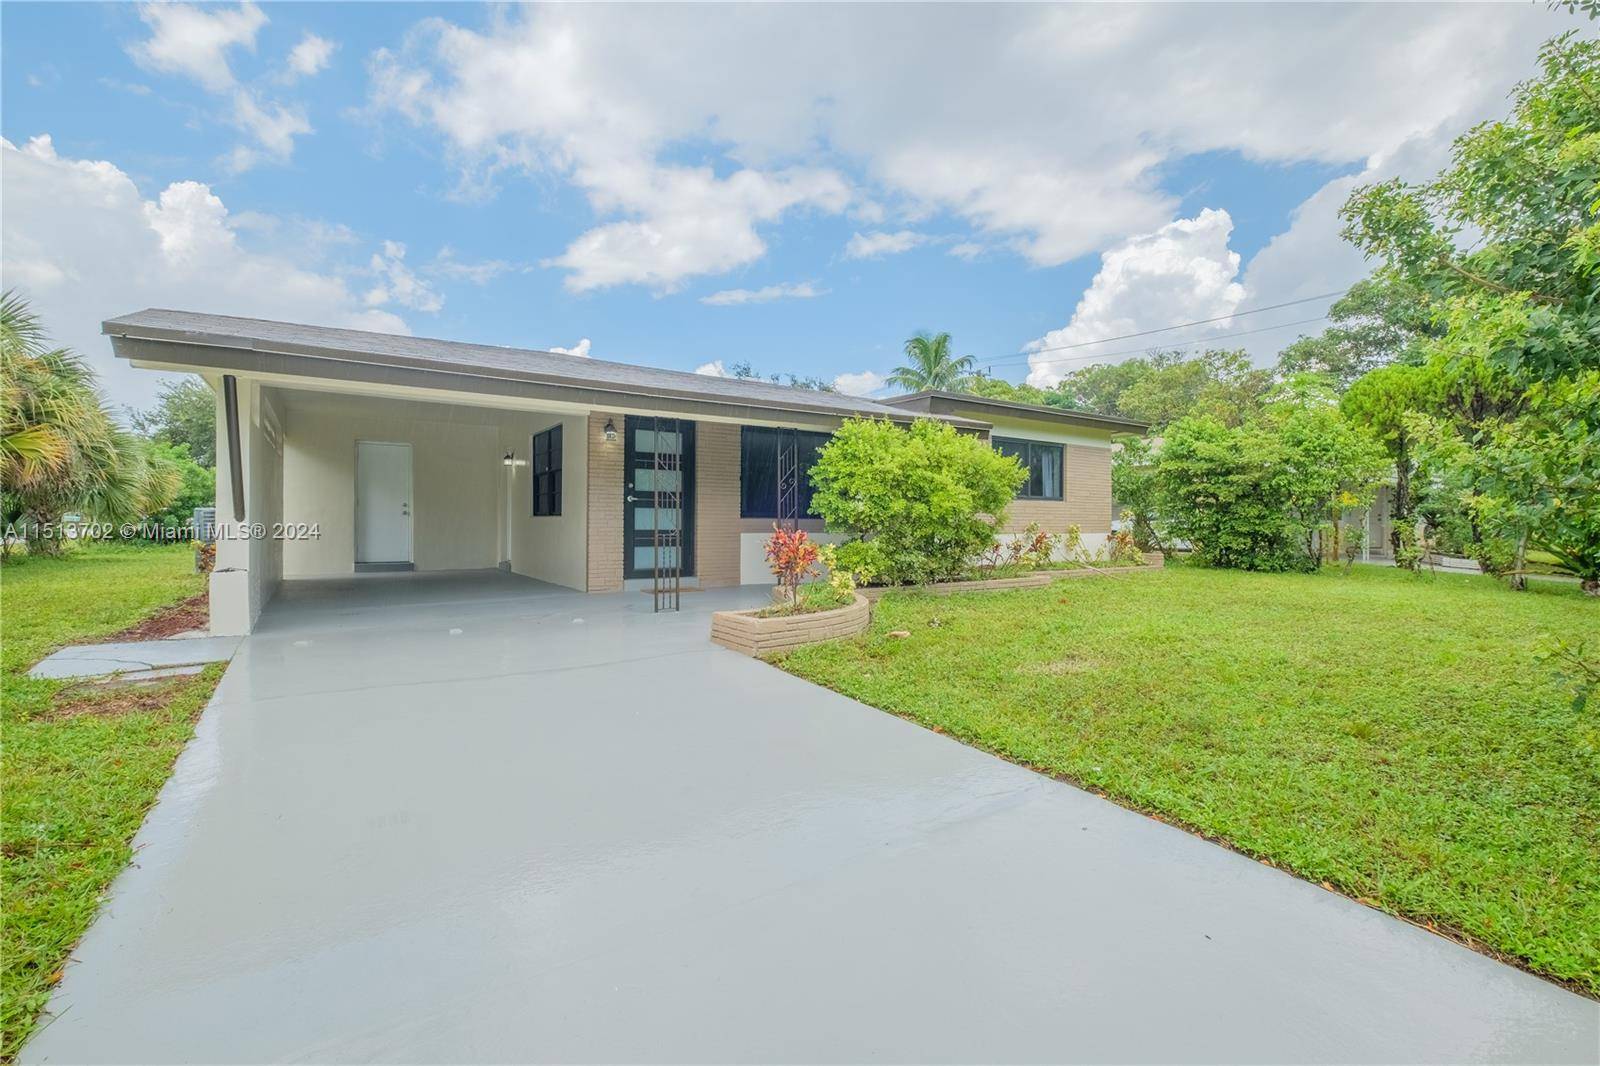 Single family home in desirable Oakland Park for rent, the home features 3 beds, 2 baths and a lovely remodeled kitchen with white cabinetry, granite counter tops and stainless steel ...